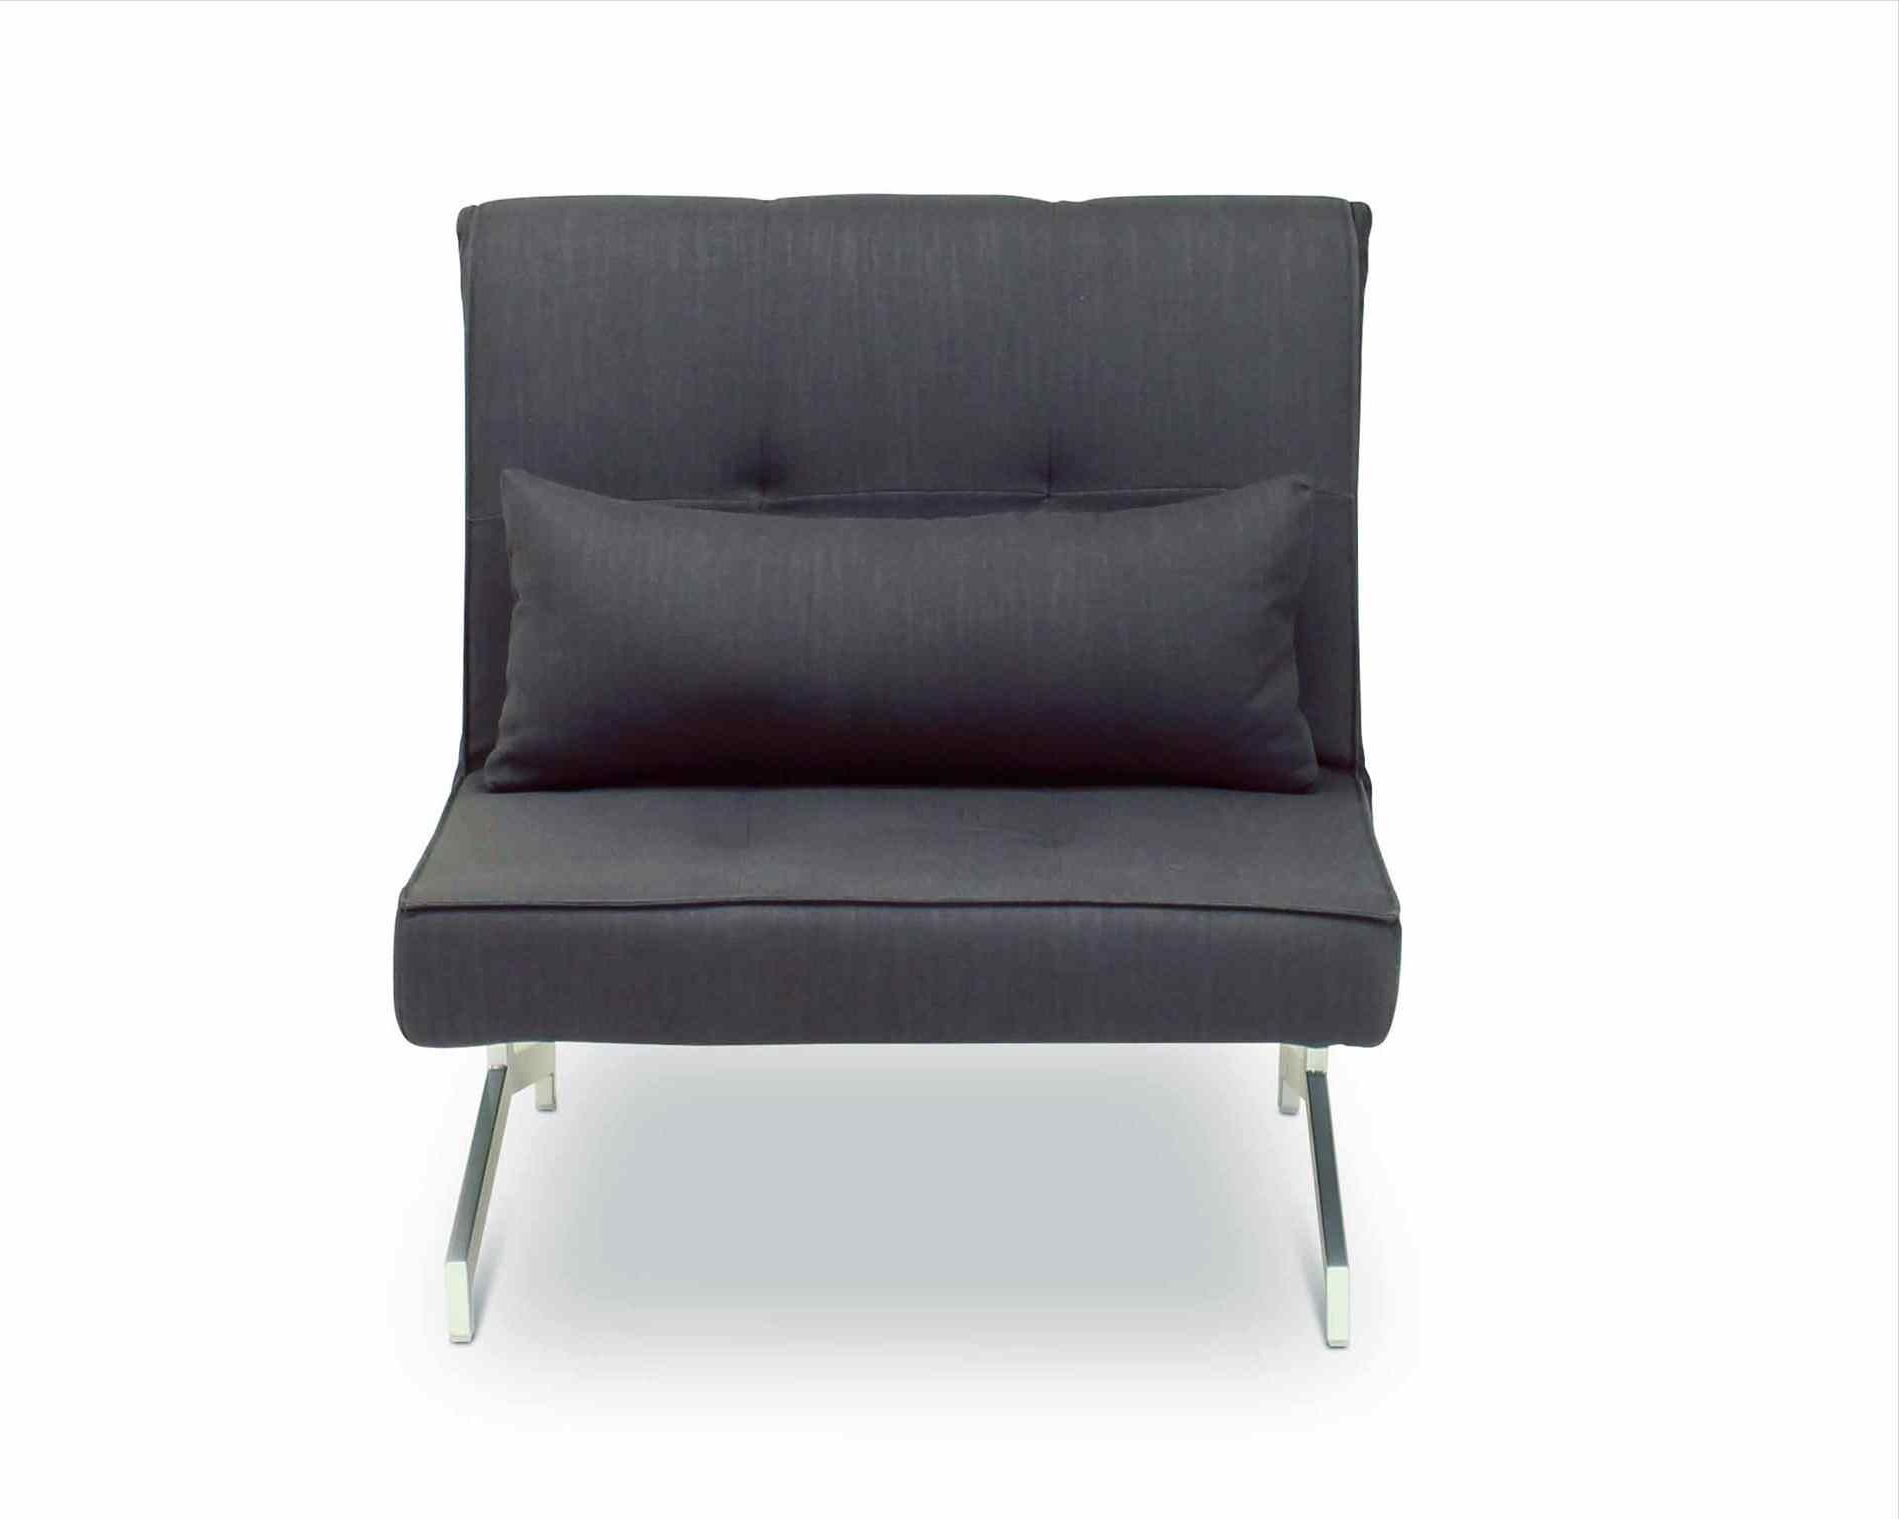 Armchair : Sofa Chairs For Living Room Ikea Rocking Chair Complete With Regard To Newest Rocking Sofa Chairs (View 15 of 20)